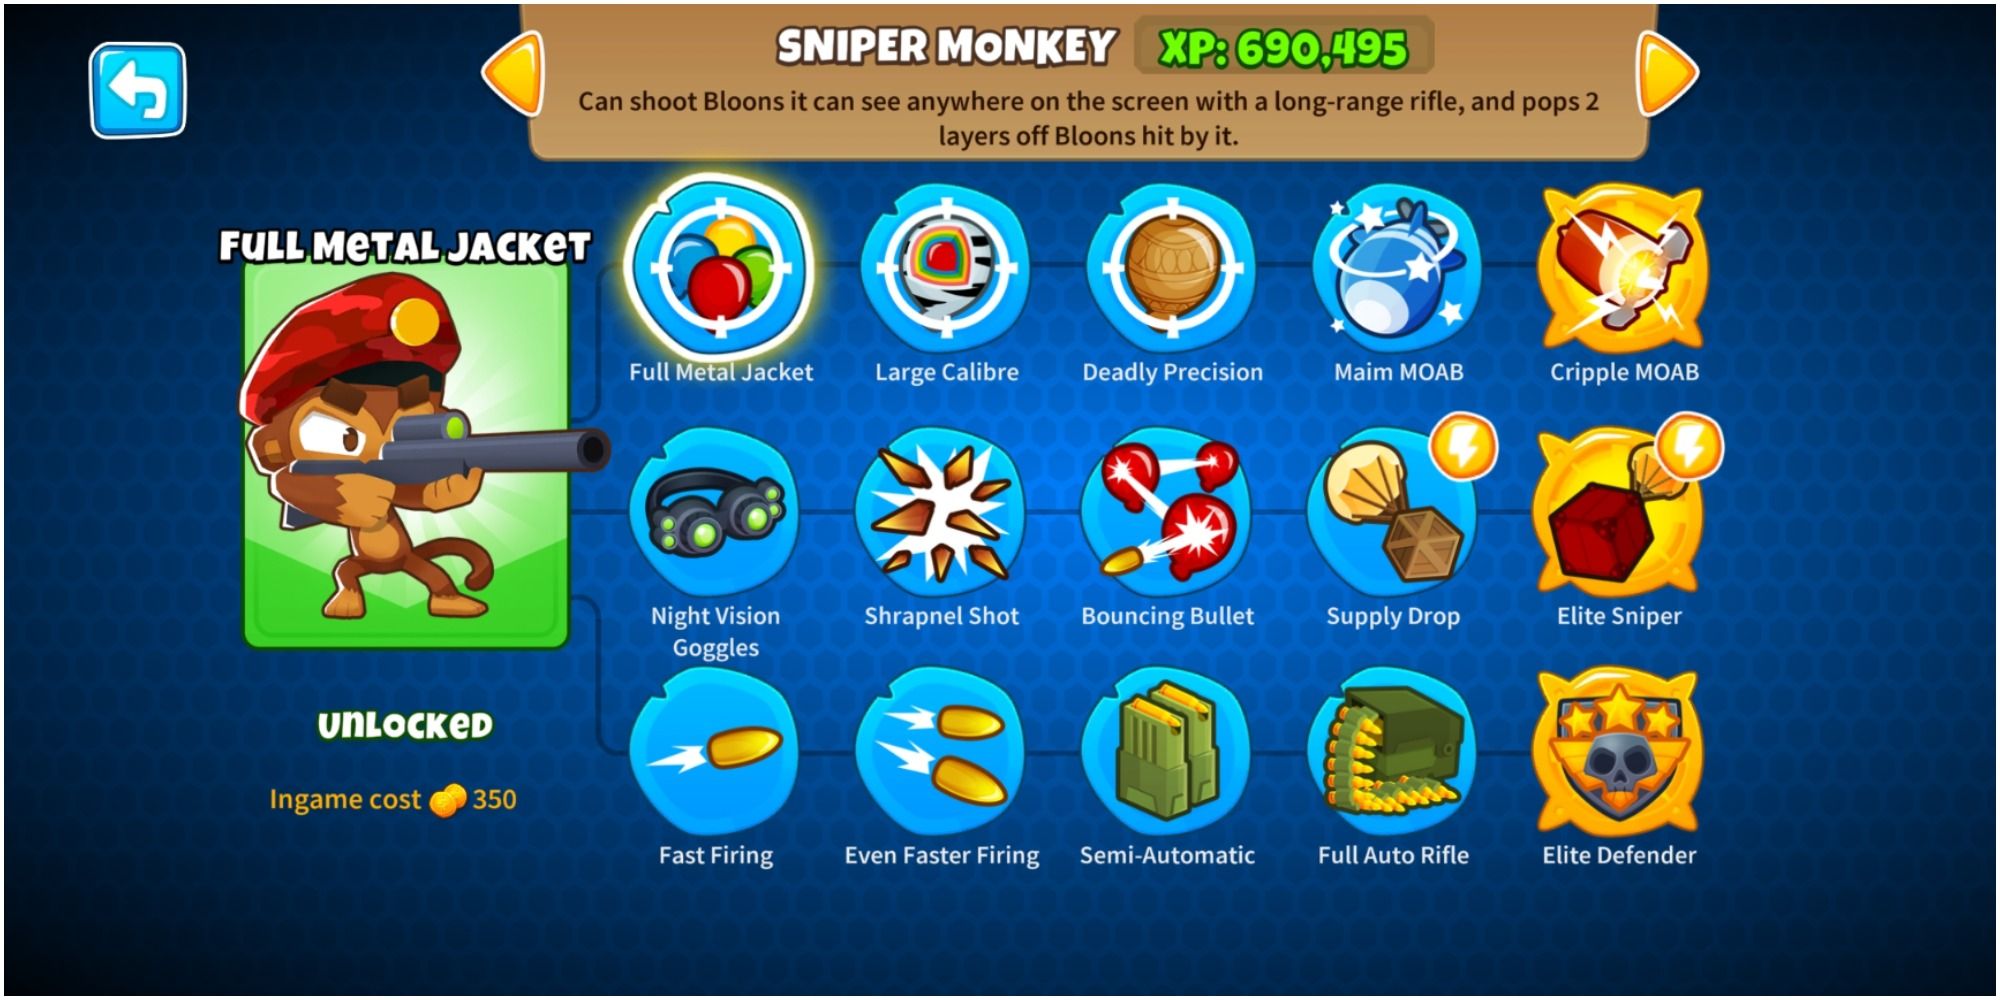 Bloons TD 6 Sniper Monkey Paths